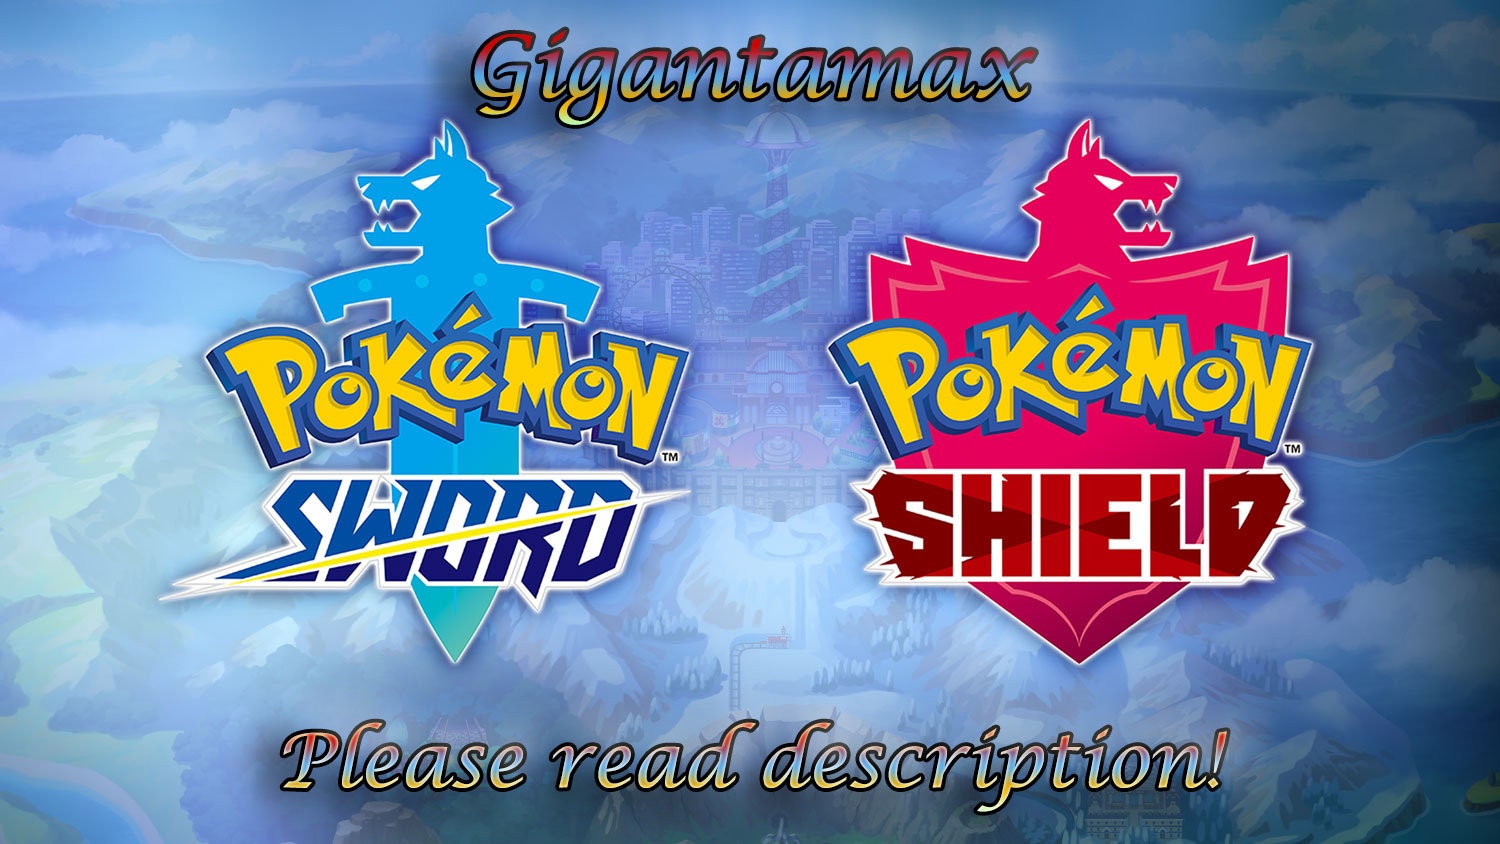 POKEMON SWORD and SHIELD ✨SHINY✨ 6IV Galar Starters! Hatch your own  +Masterballs